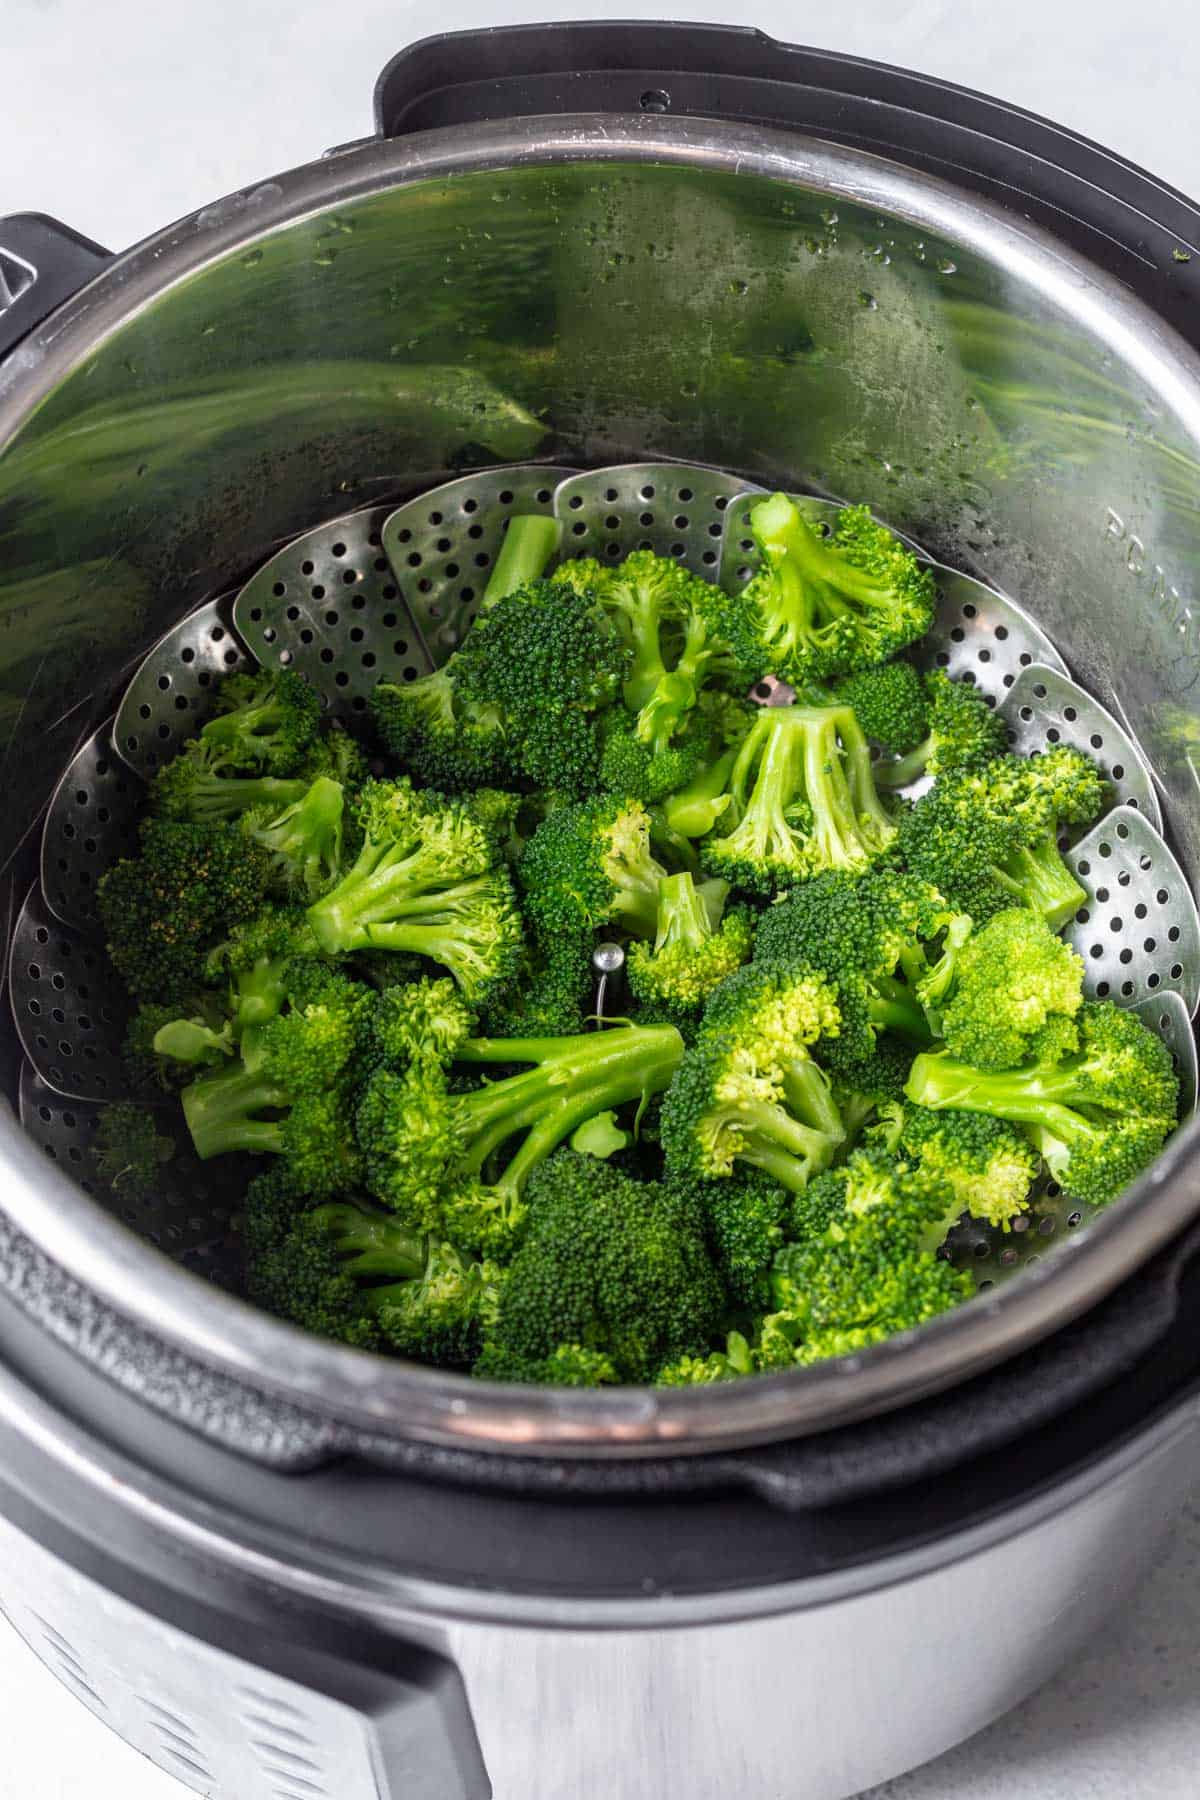 Cooked broccoli in an instant pot.